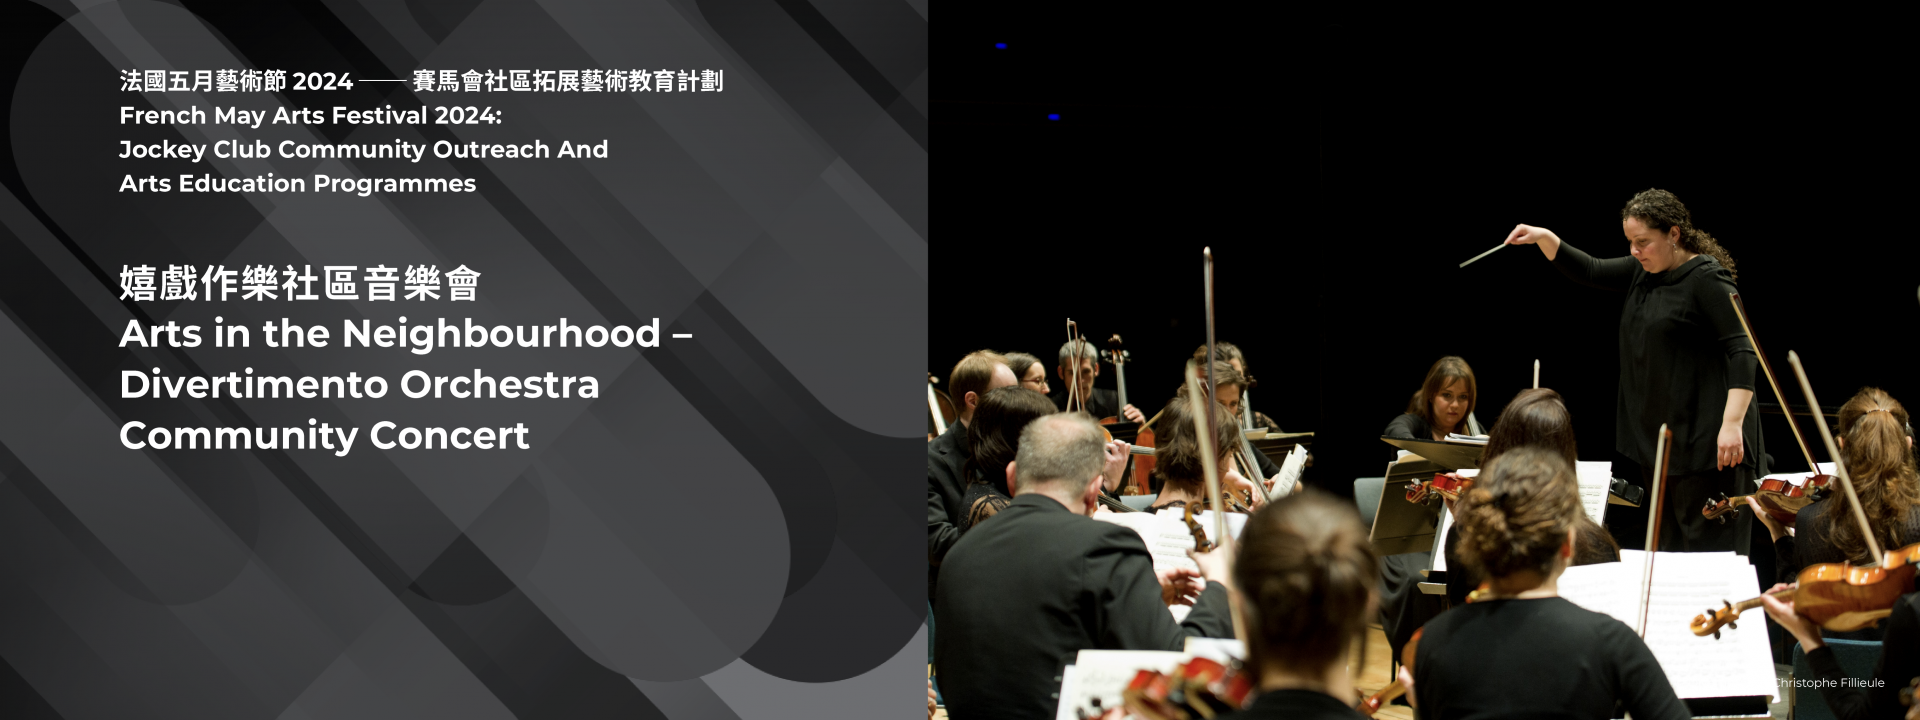 Arts In The Neighborhood — Divertimento Orchestra Community Concert